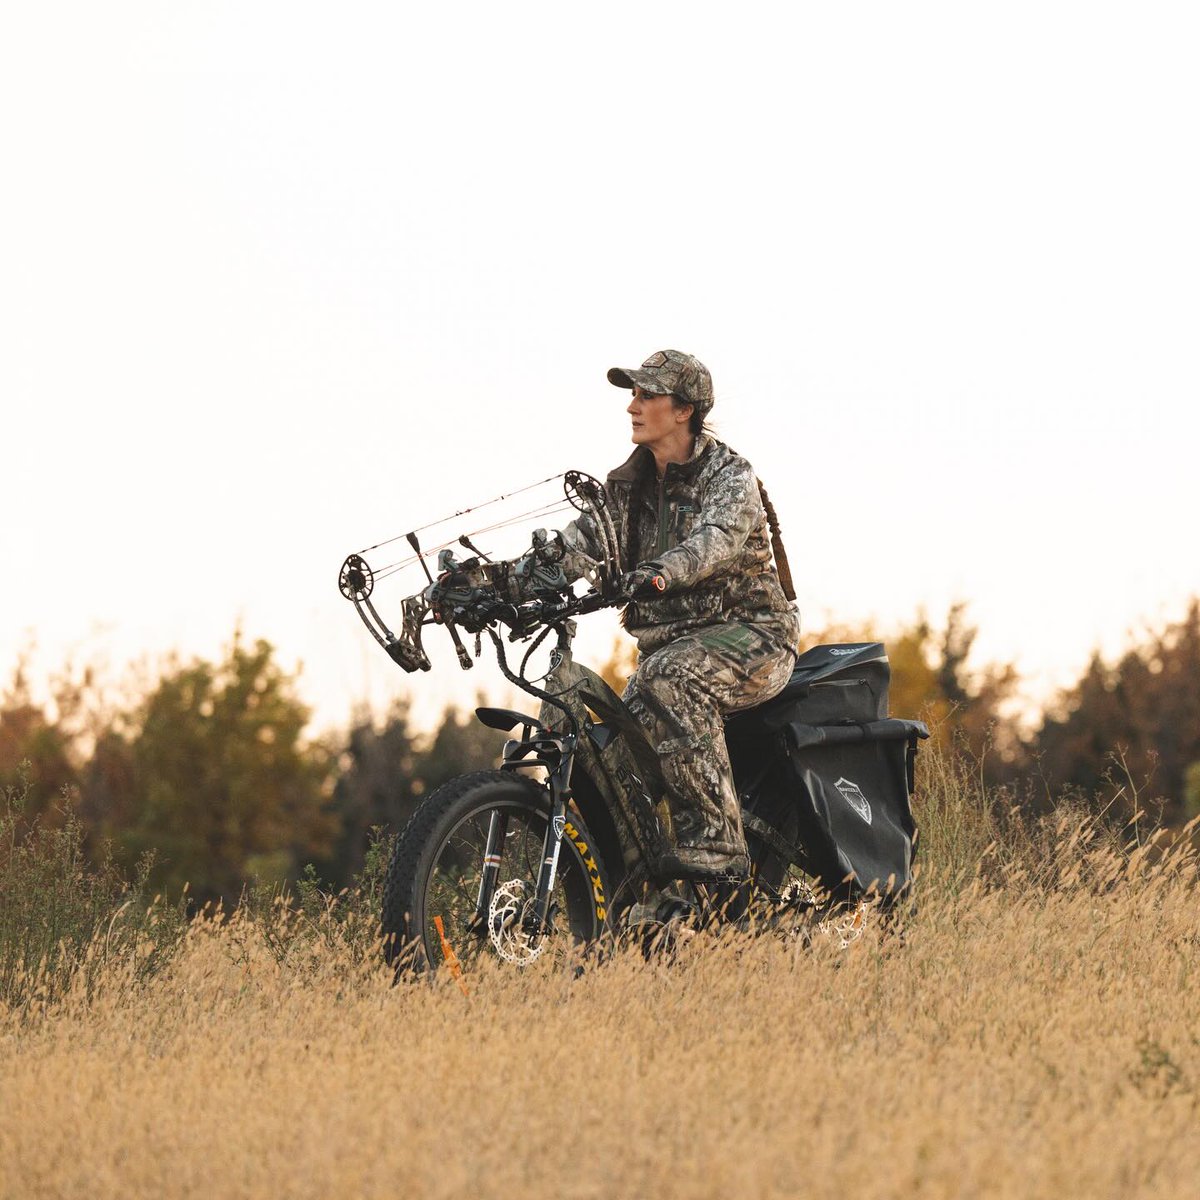 The best way to creep in silently and quickly is with Bakcou. These e-bikes are meant to get out there and hear the sounds around you. Be mobile and silent at the same time. Link to shop now: realtree.me/4bKTbe1 #Realtree